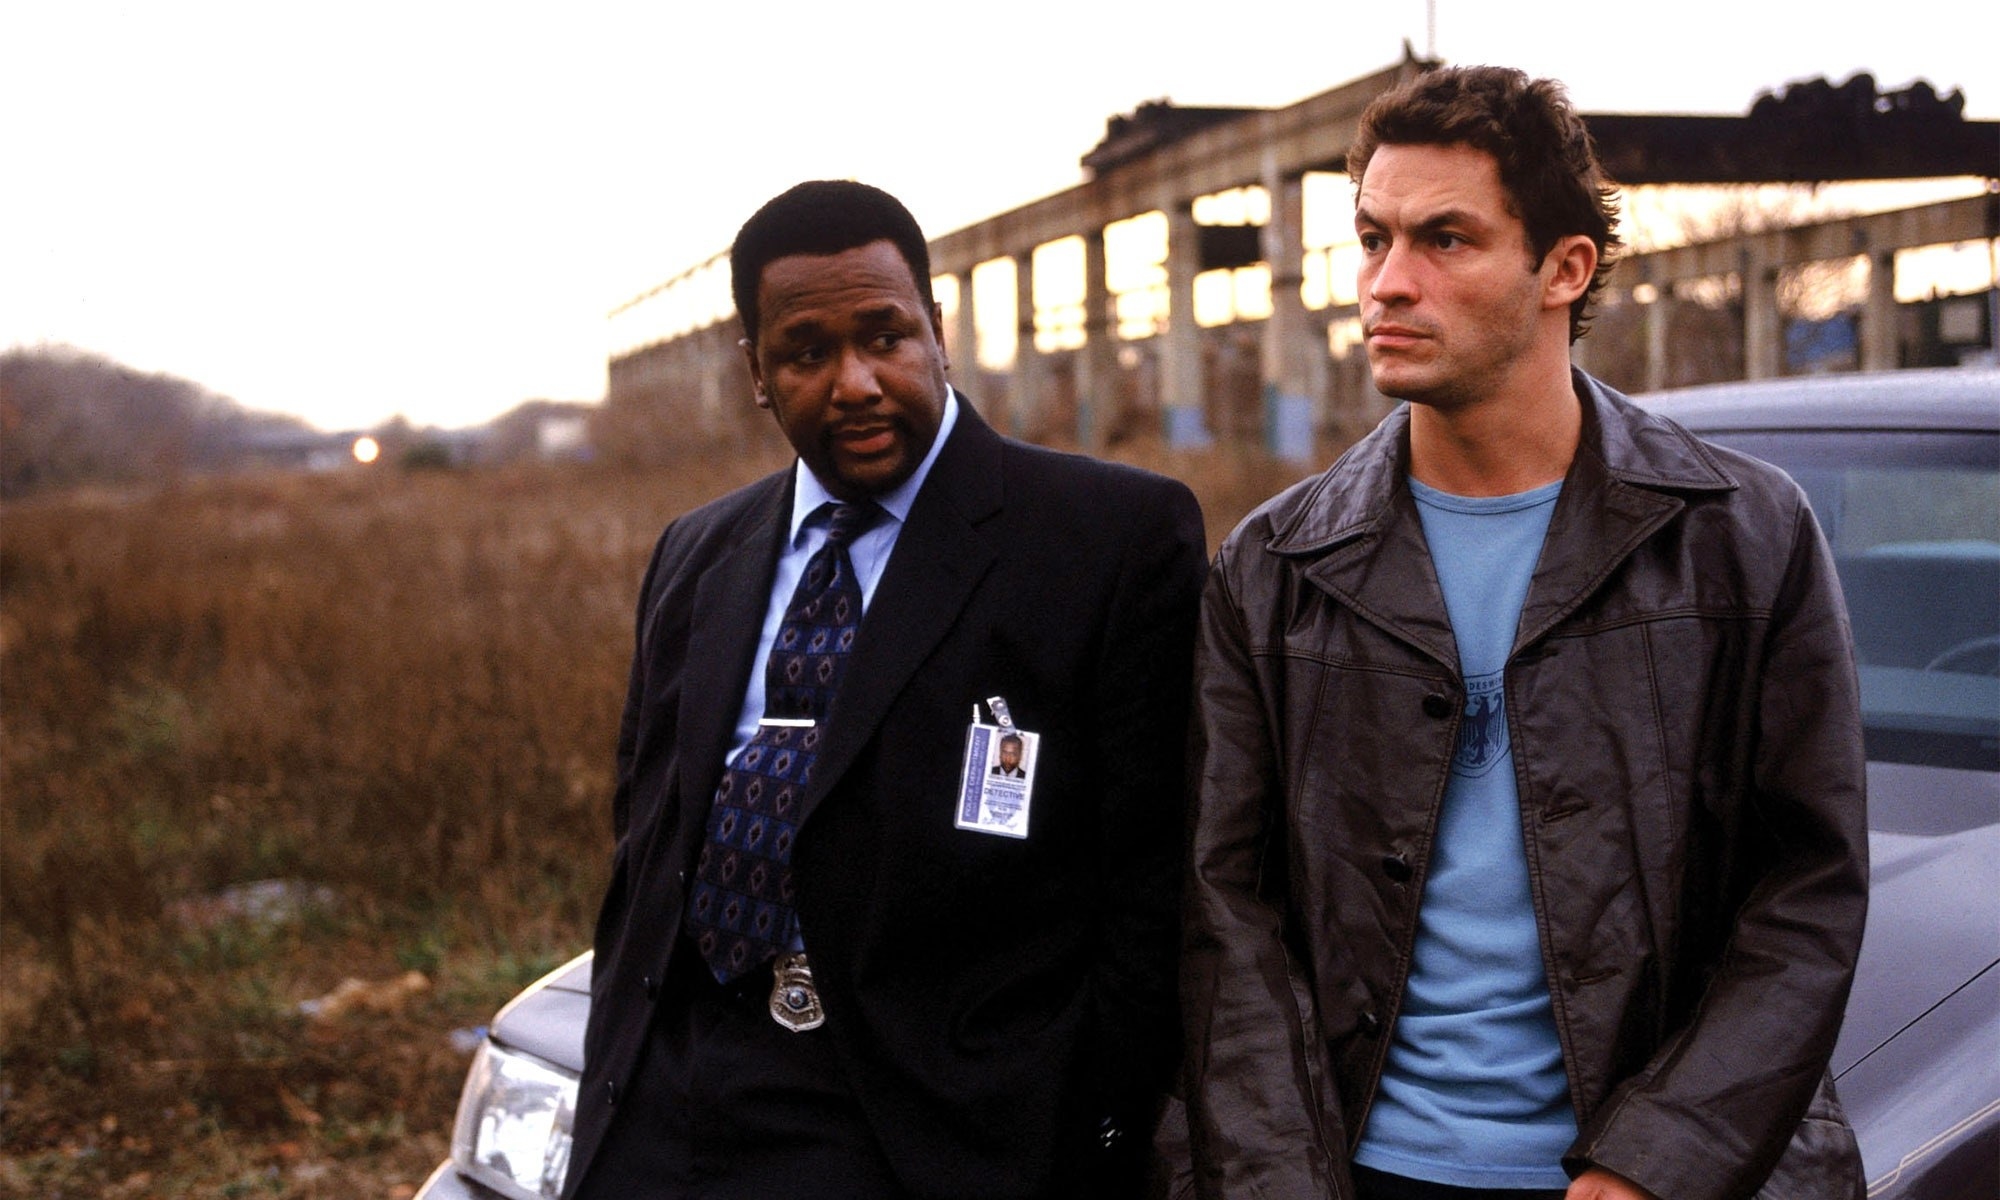 Wendell Pierce as Detective Bunk Moreland and Dominic West as Detective Jimmy McNulty stood by their car near an abandoned building in &quot;The Wire&quot;